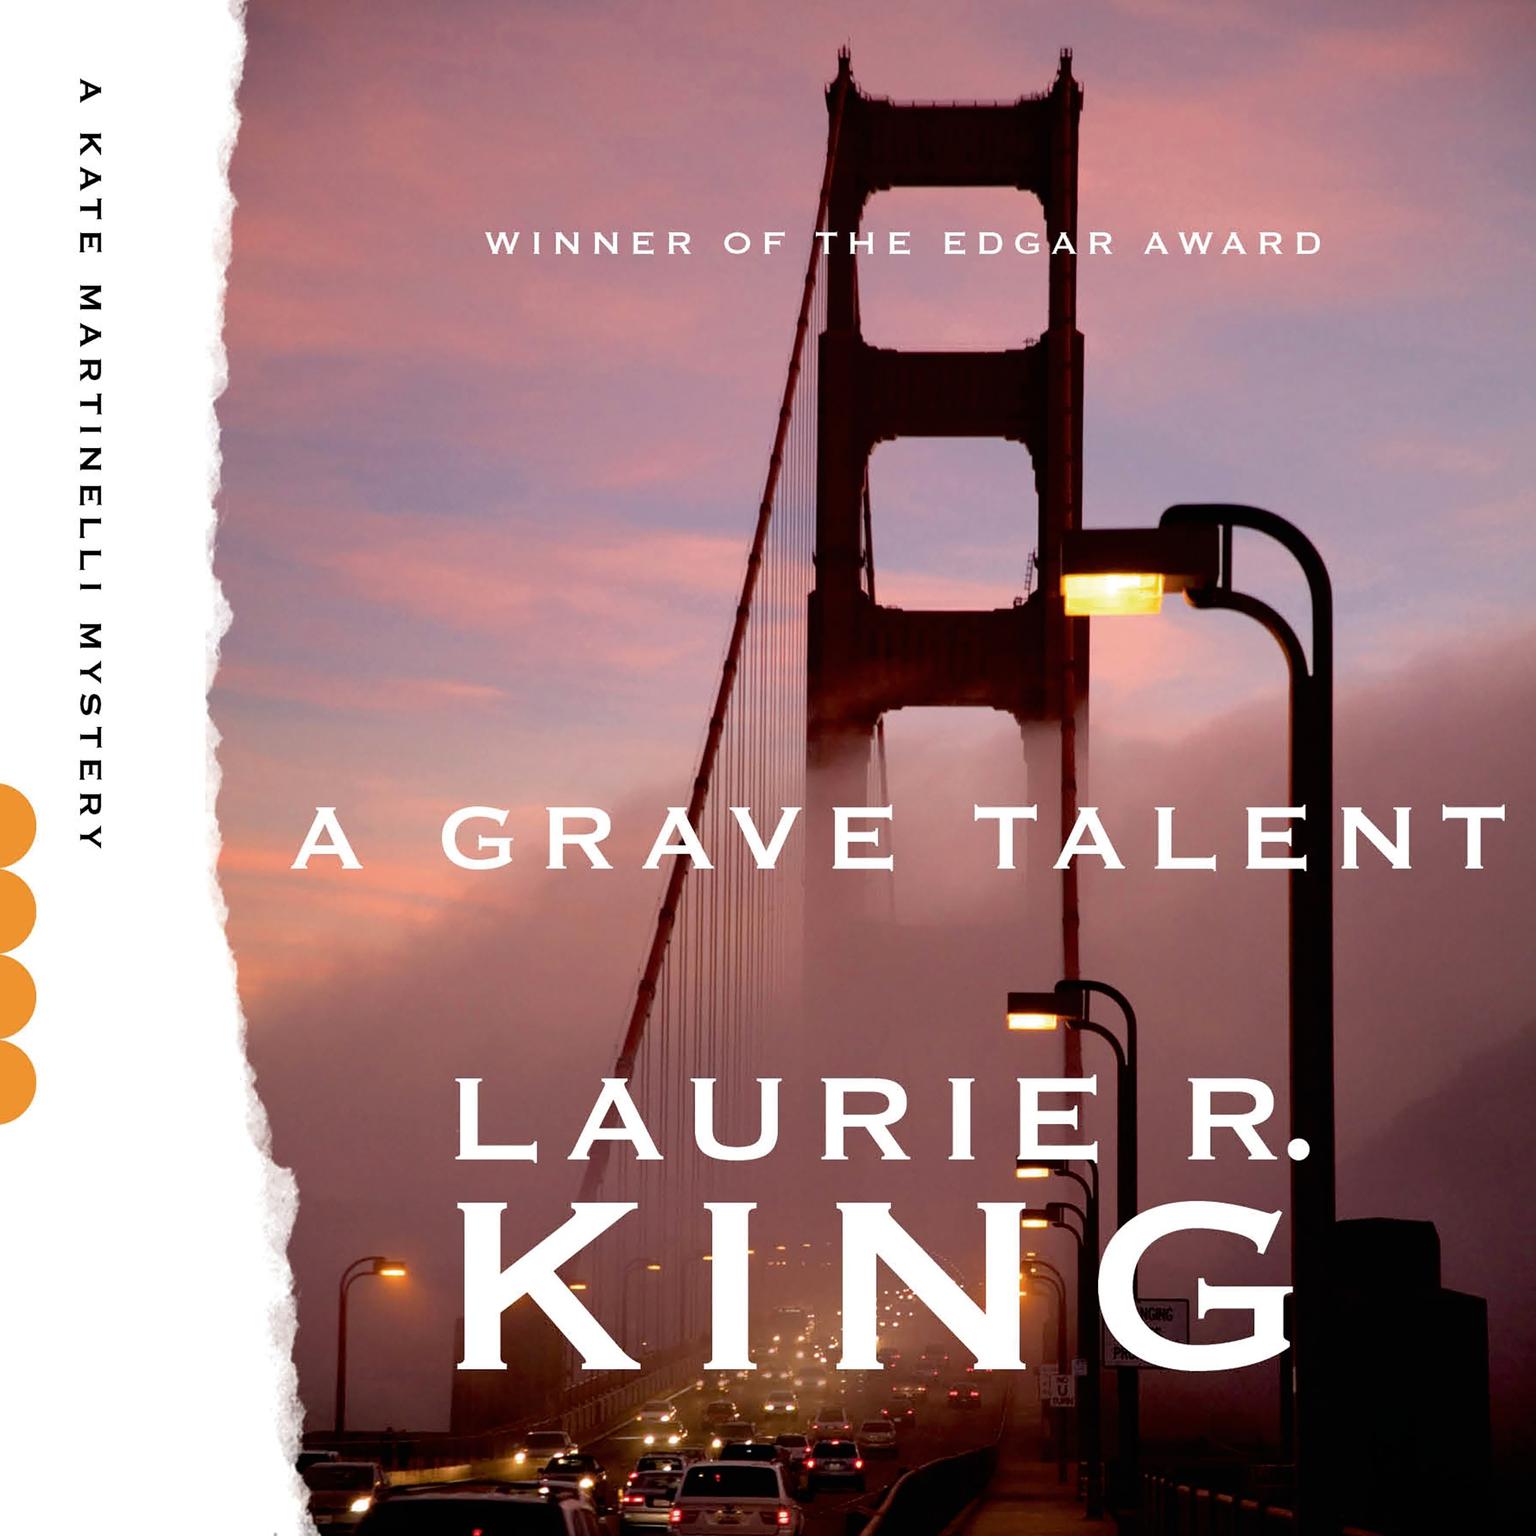 A Grave Talent: A Novel Audiobook, by Laurie R. King